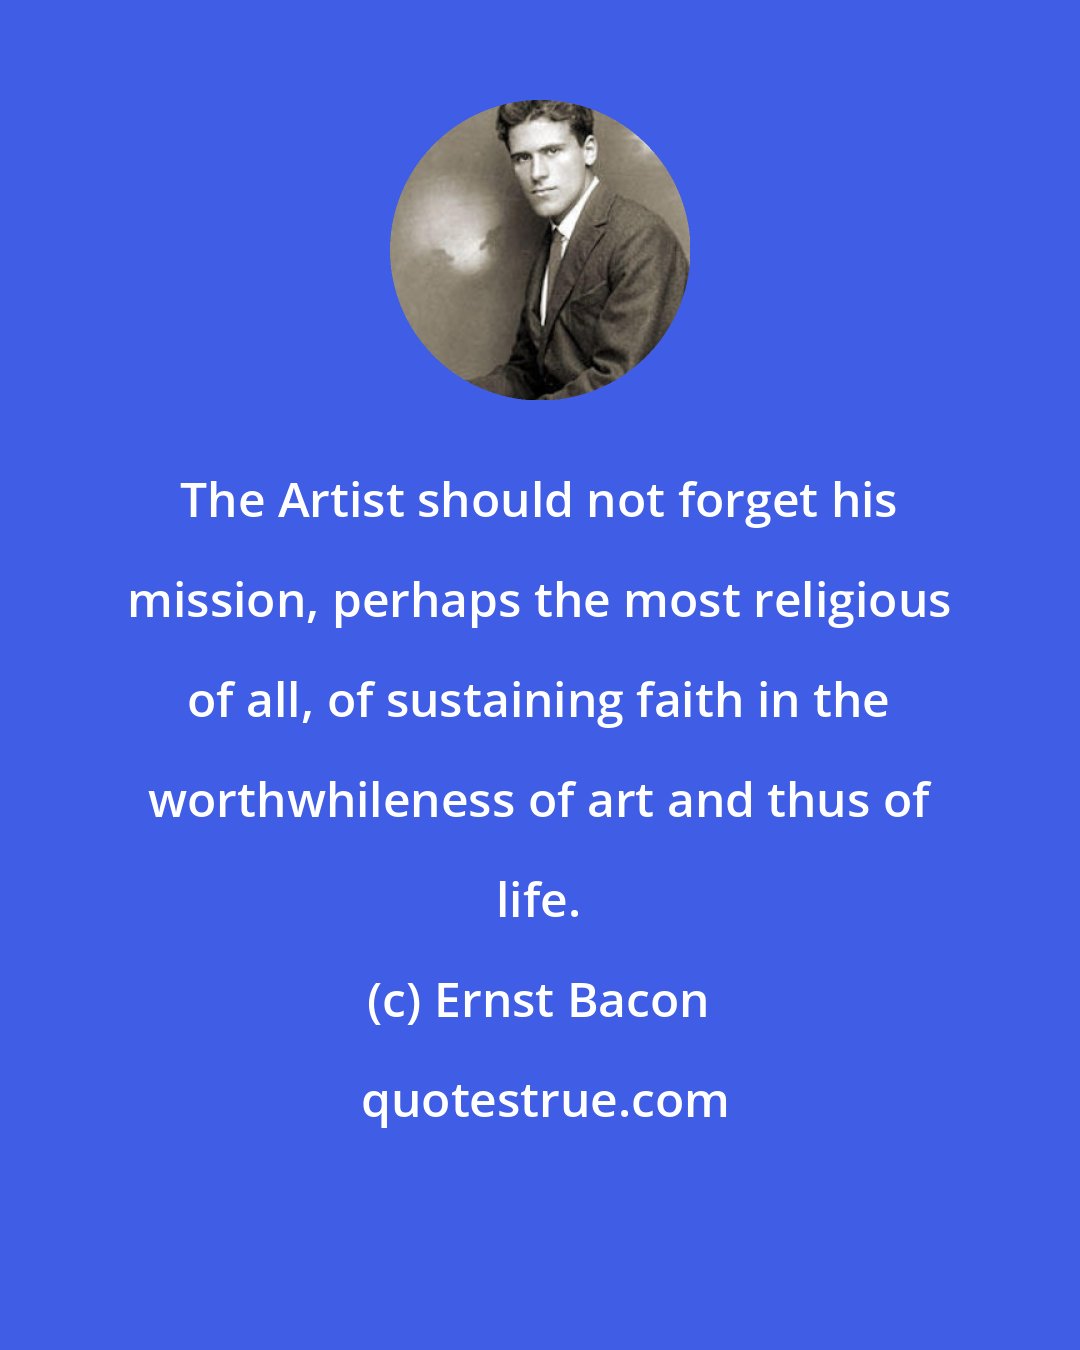 Ernst Bacon: The Artist should not forget his mission, perhaps the most religious of all, of sustaining faith in the worthwhileness of art and thus of life.